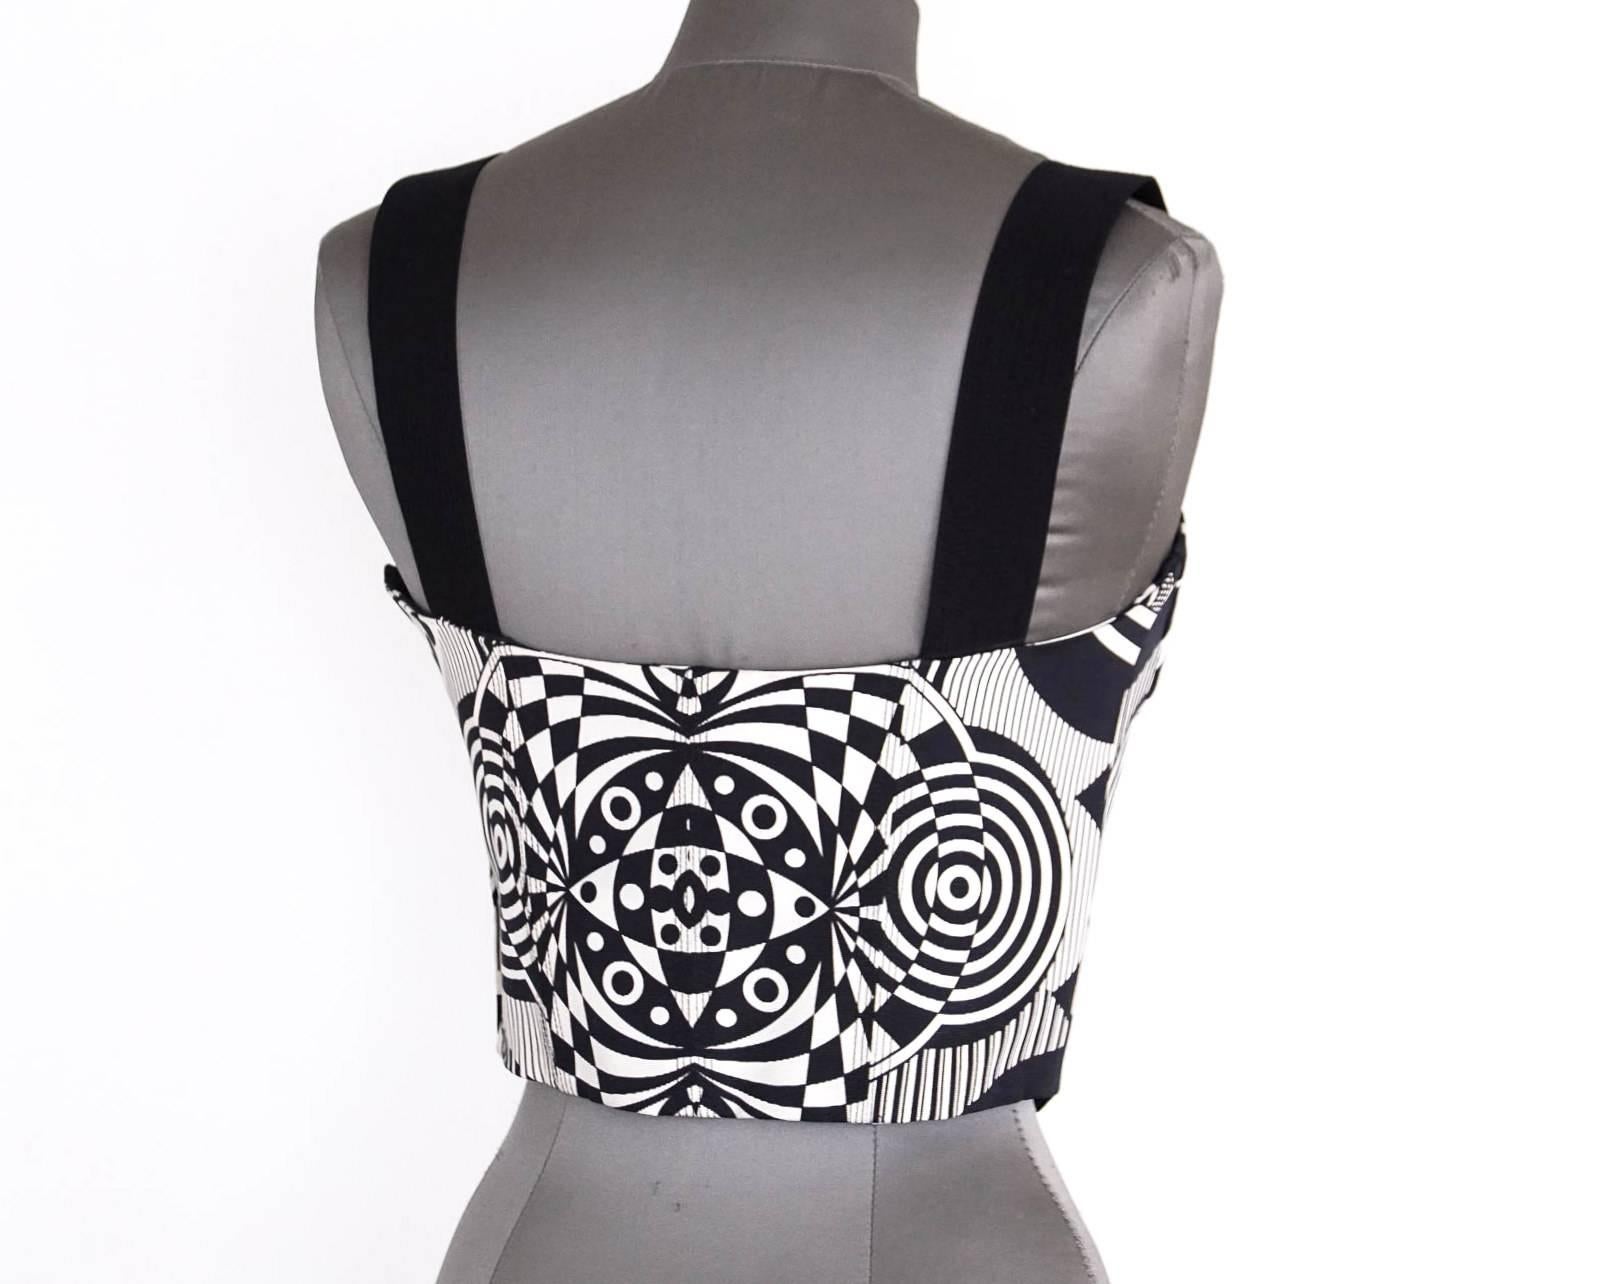 Guaranteed authentic GIANNI VERSACE COUTURE 1990's Vintage black and white bustier in a striking geometric pattern.
As seen on Linda Evangalista.
Defined cups with 1.5" black straps.
Decorative black top stitch over boning provide support and